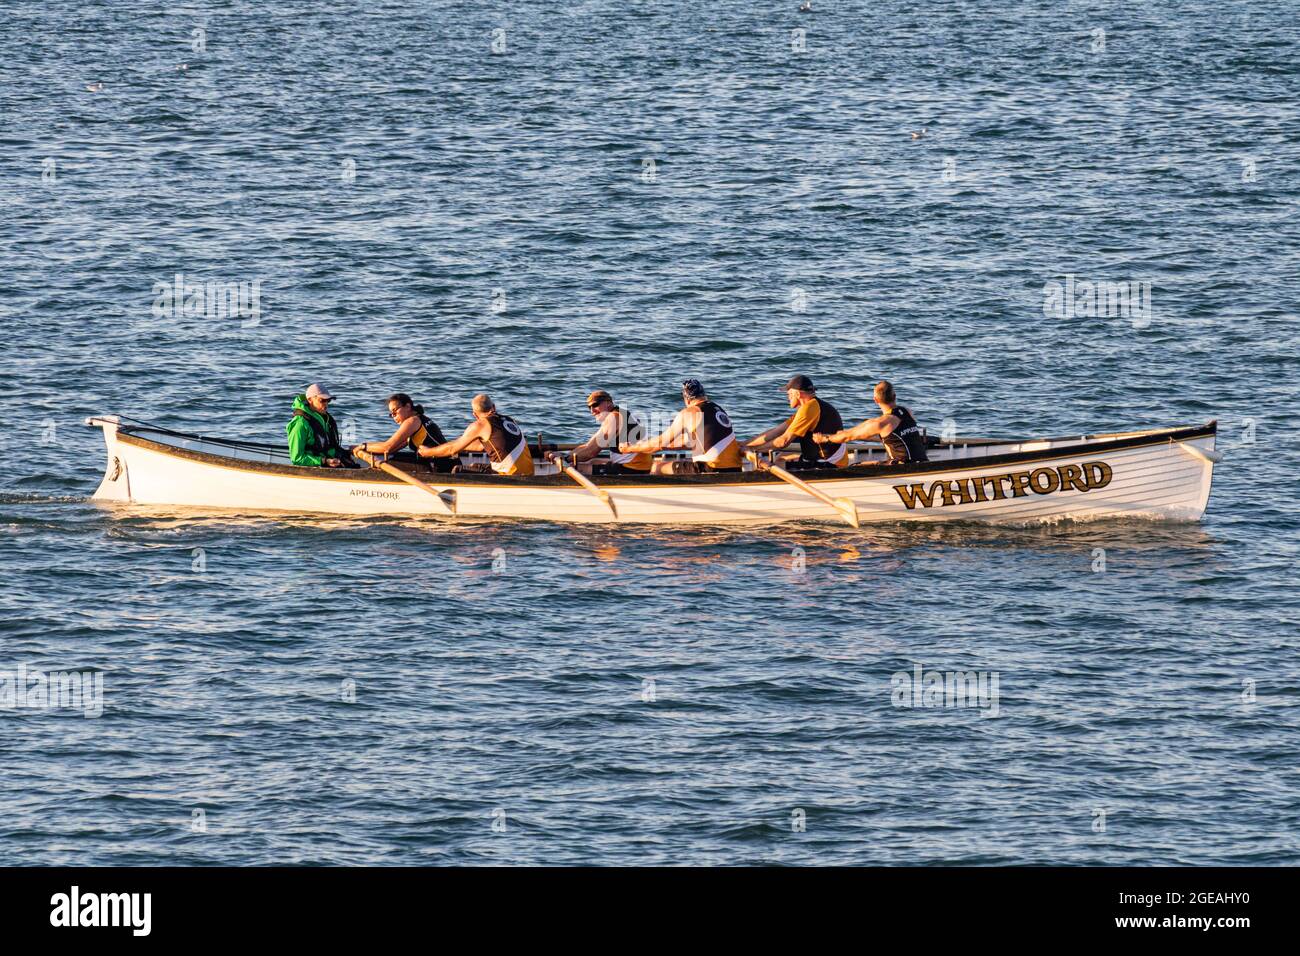 Evening View of the Appledore Gig Racing Boat ‘Whitford’ and Team Racing on the River Torridge. Stock Photo